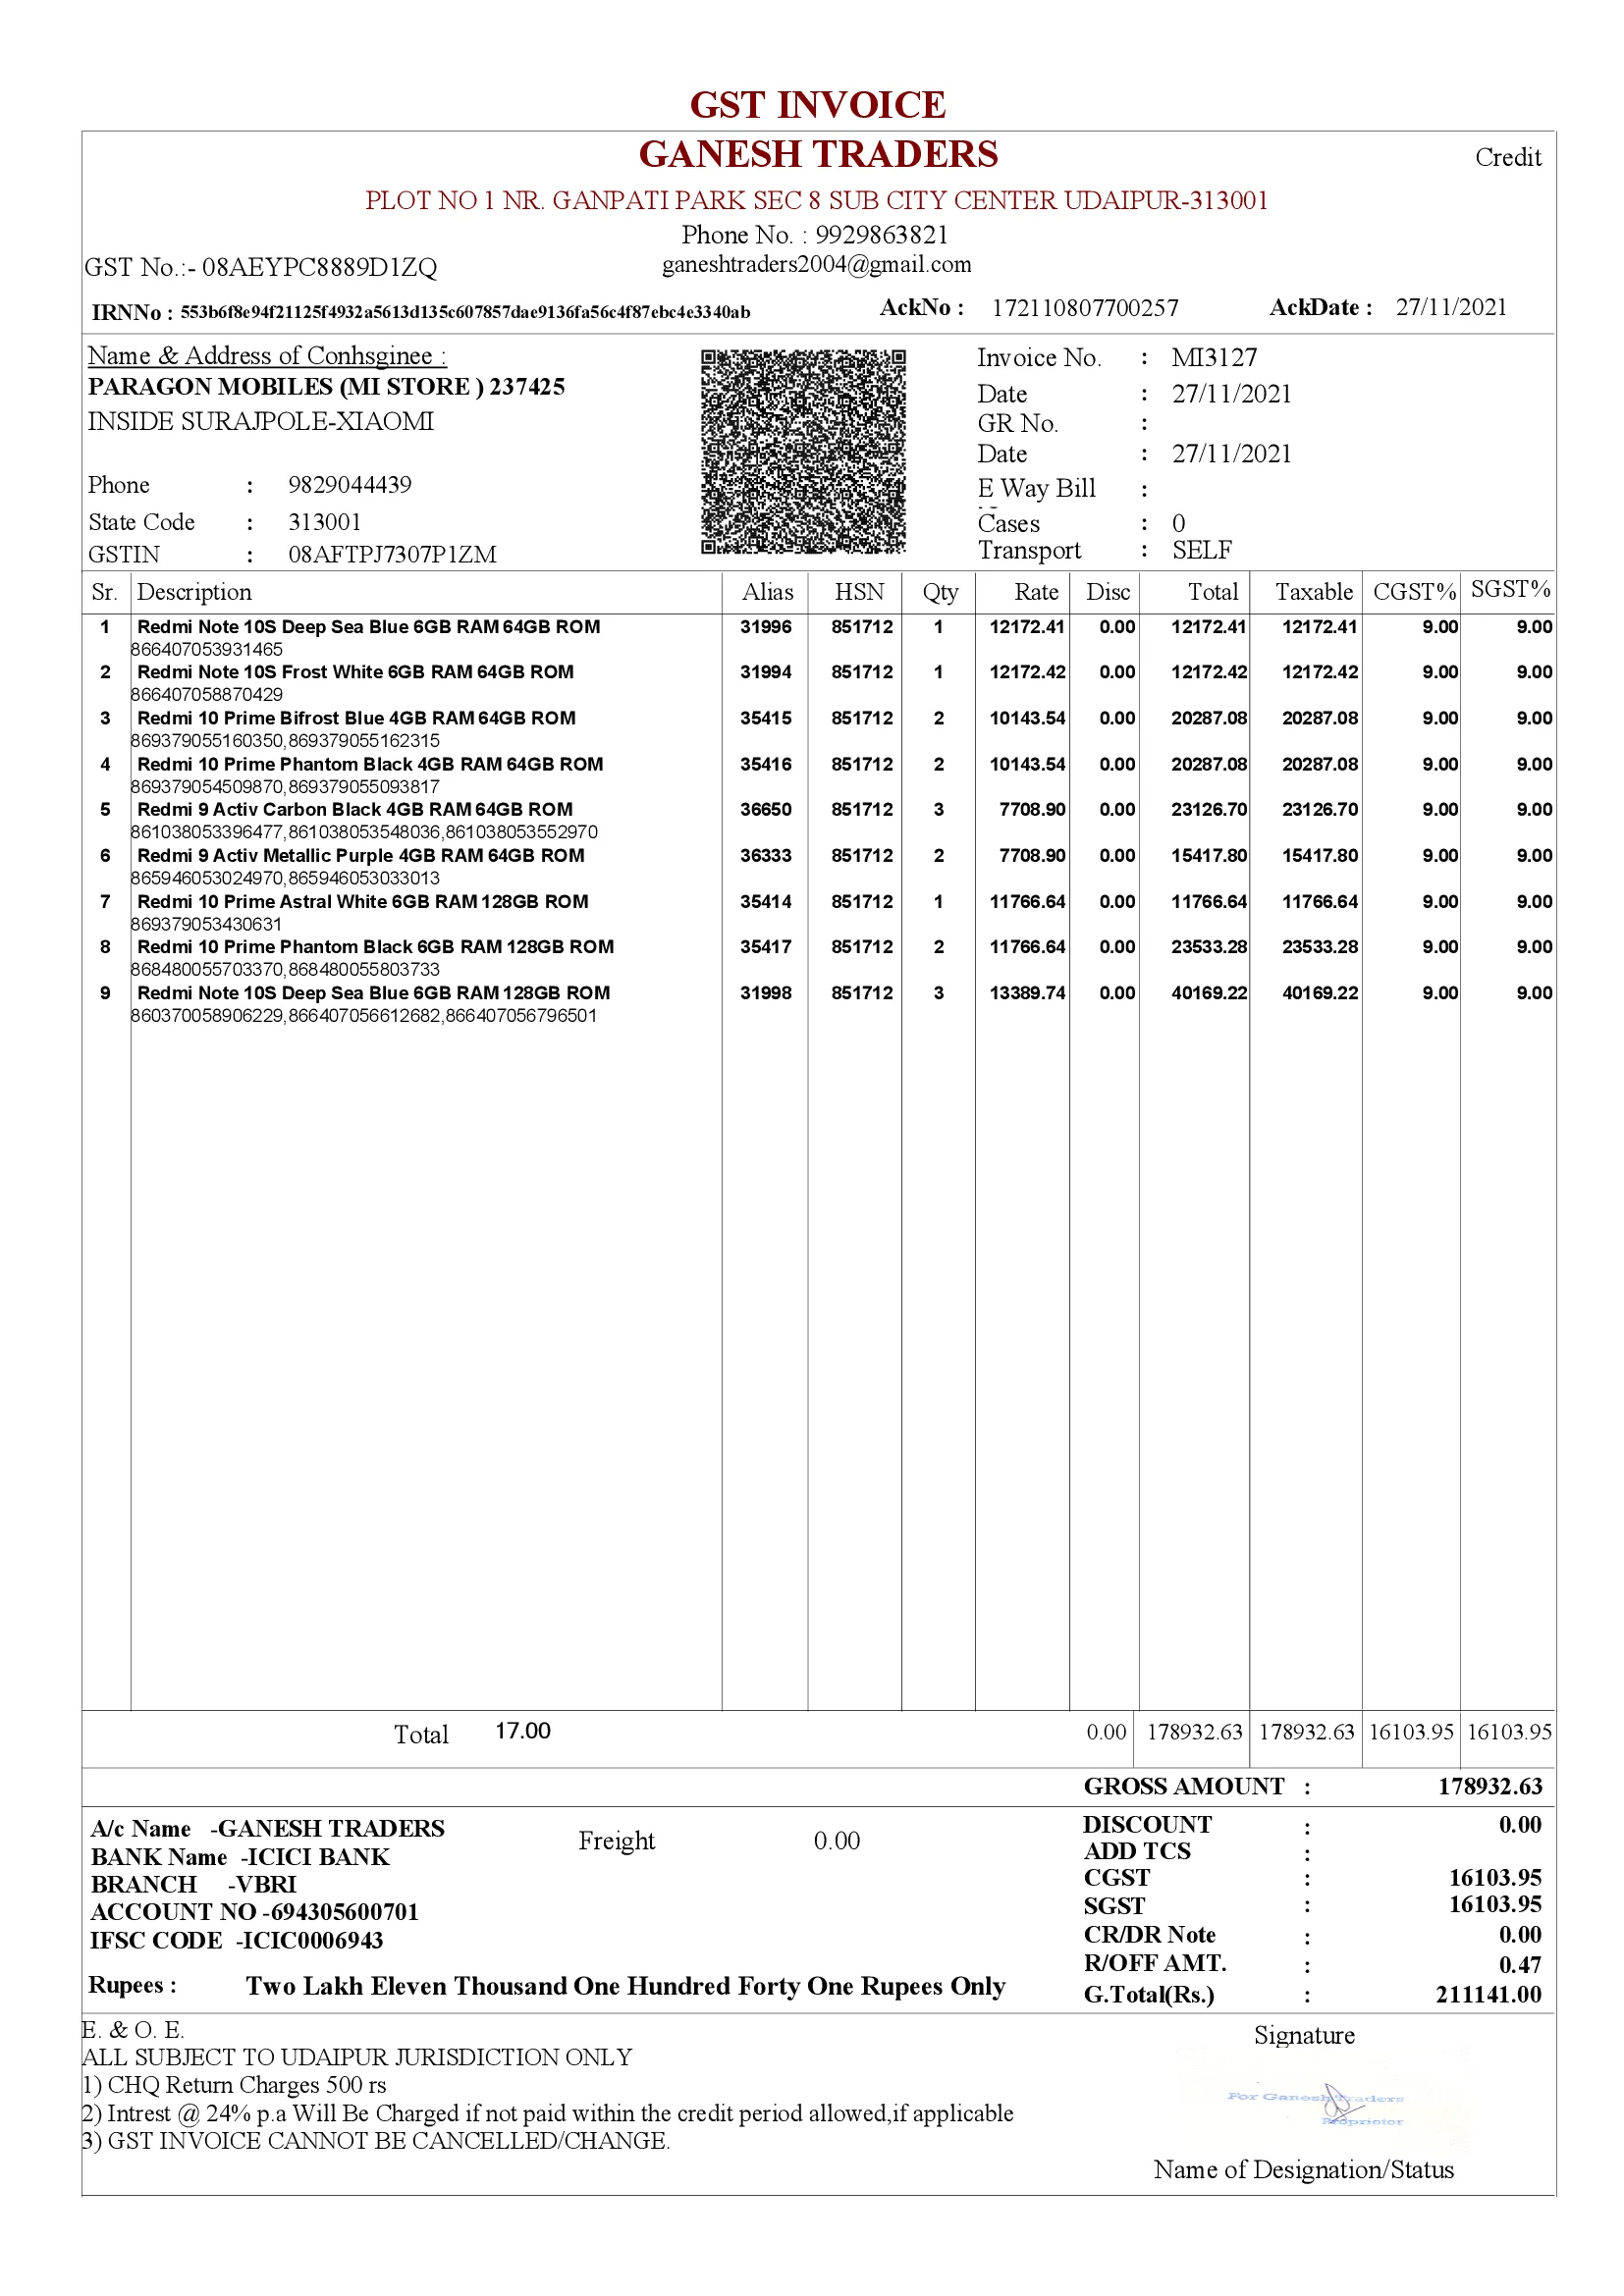 Laser E-Invoice Bill Format with QR Code